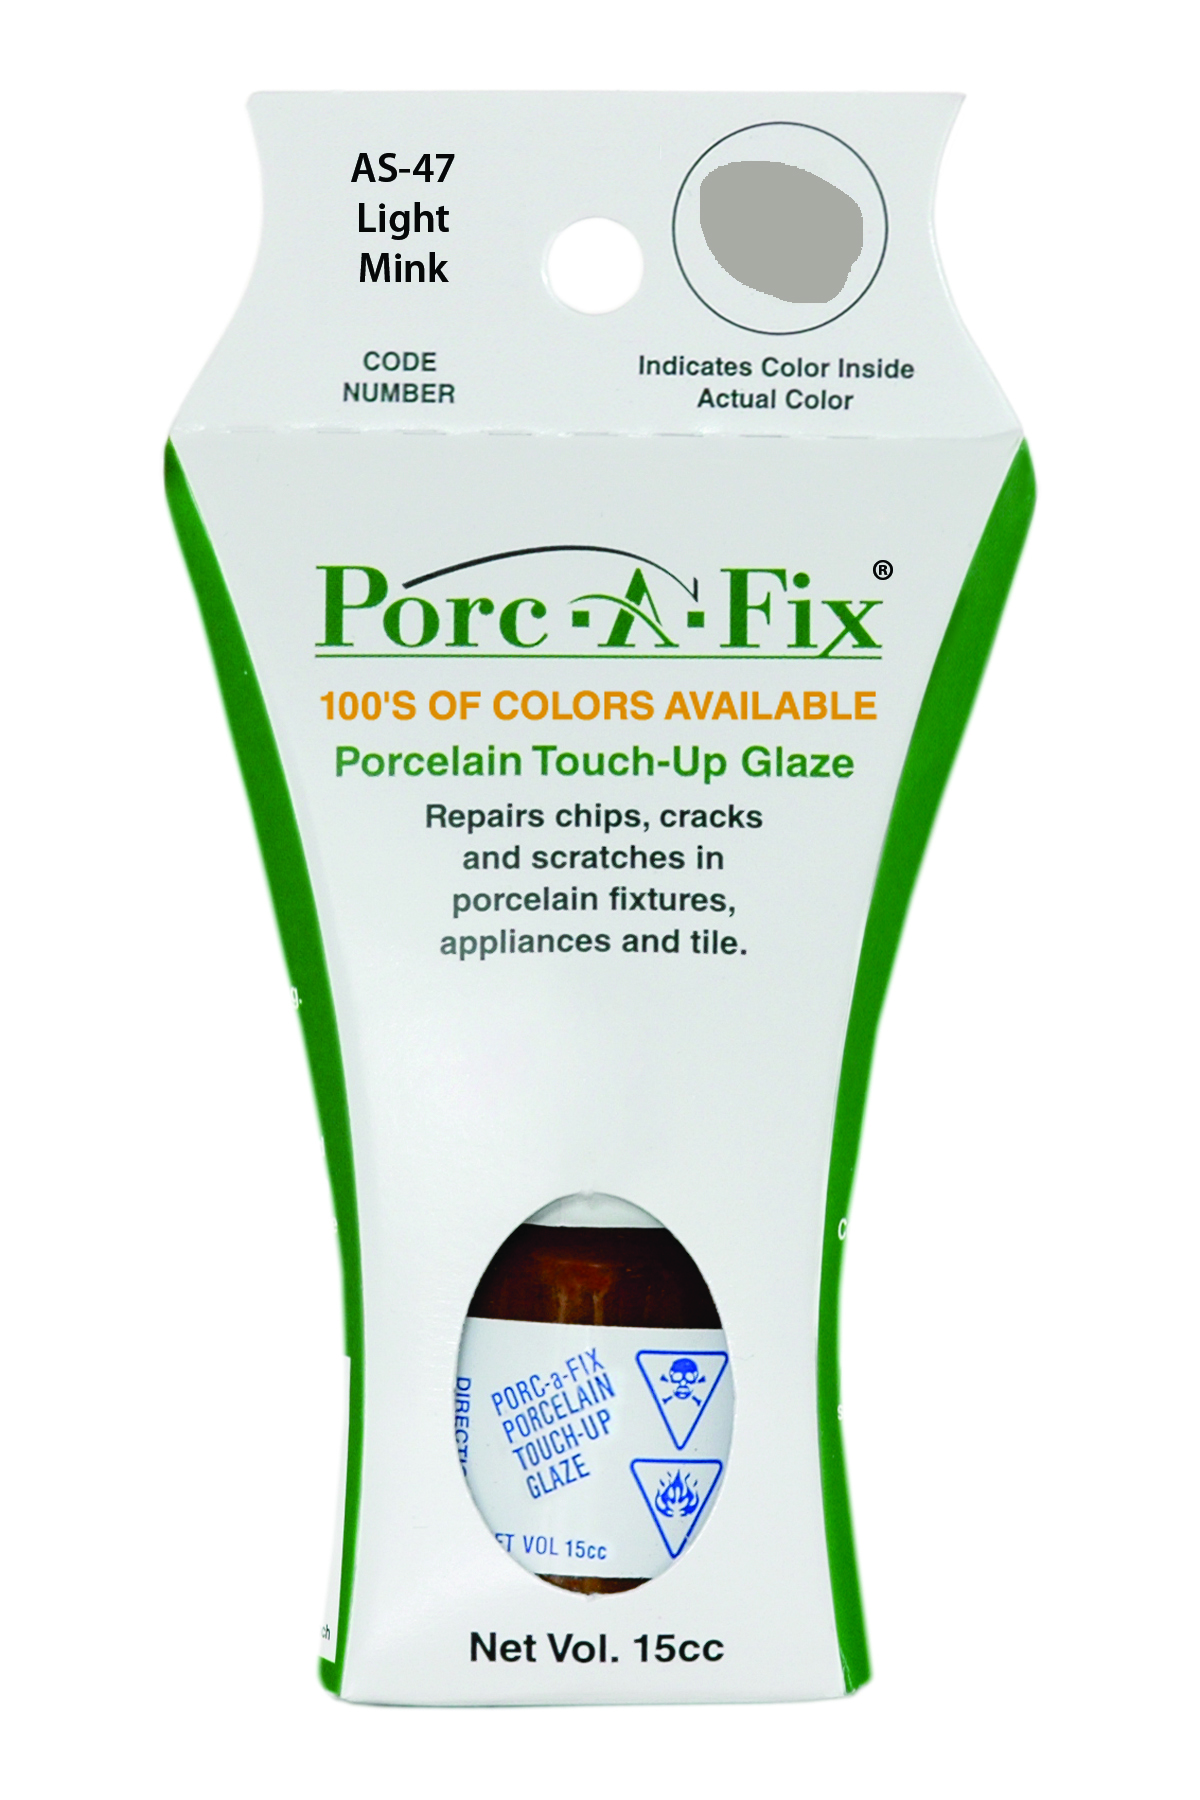 Fixture-Fix | AS-47 | Porc-A-Fix Touch-Up Glaze American Standard Light Mink - Compatible with American Standard 070900-1900A Touch Up Paint Kit - LIGHT MINK